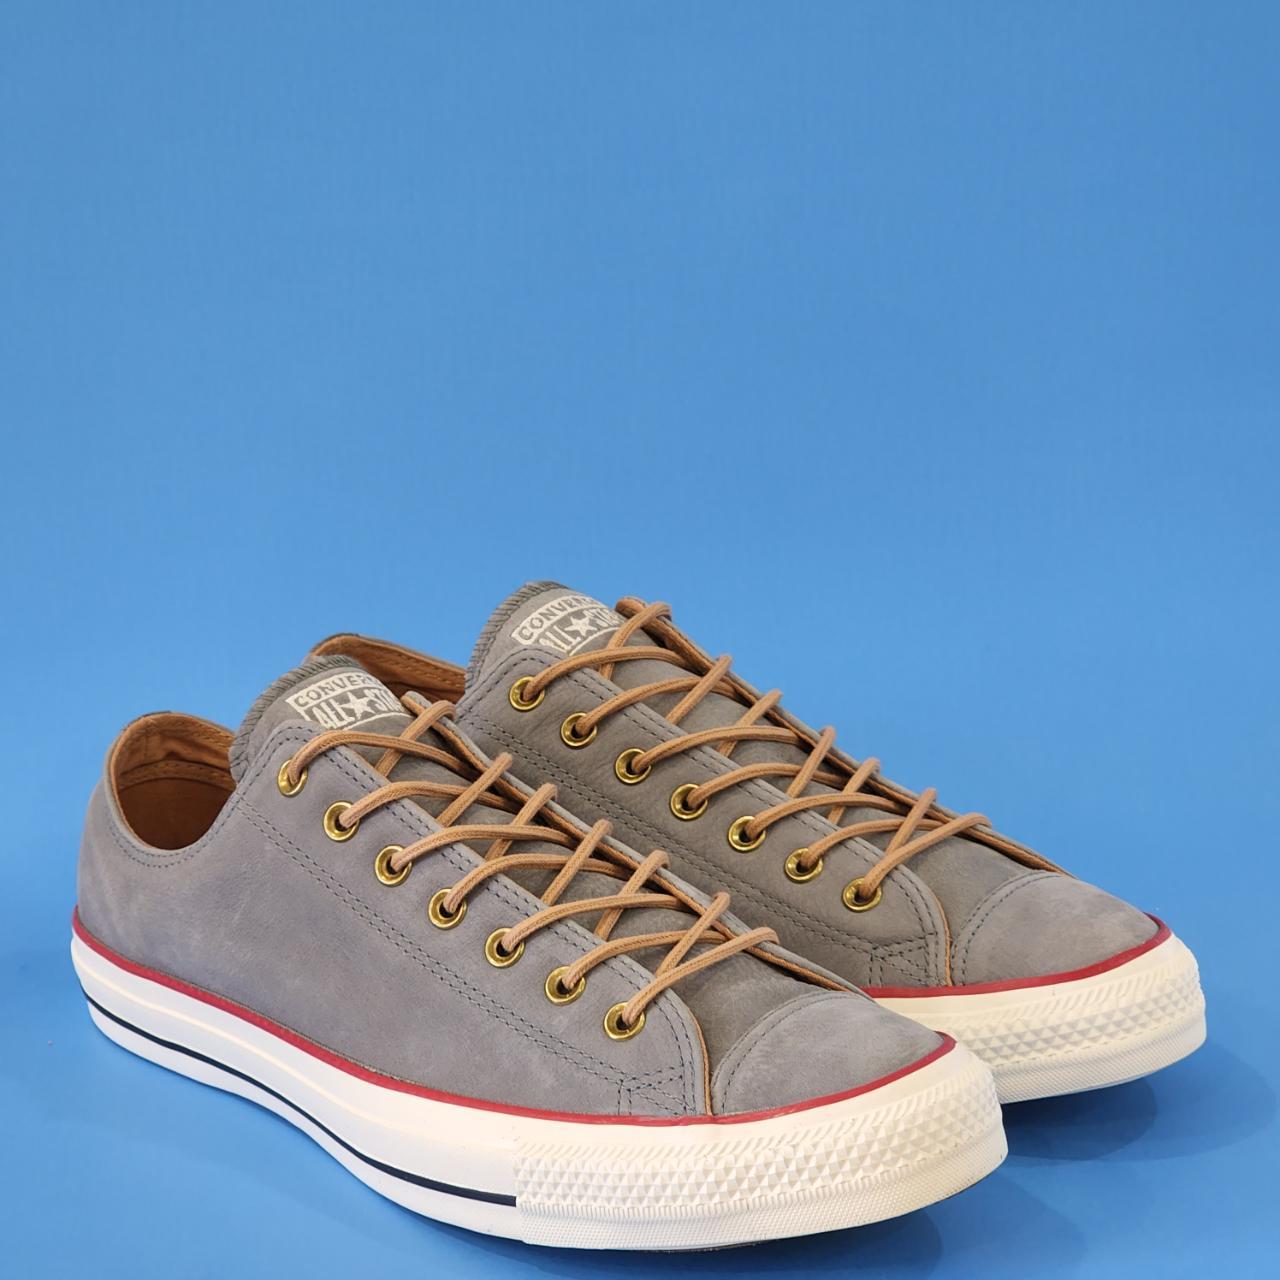 Converse Men's Grey and Brown Trainers | Depop